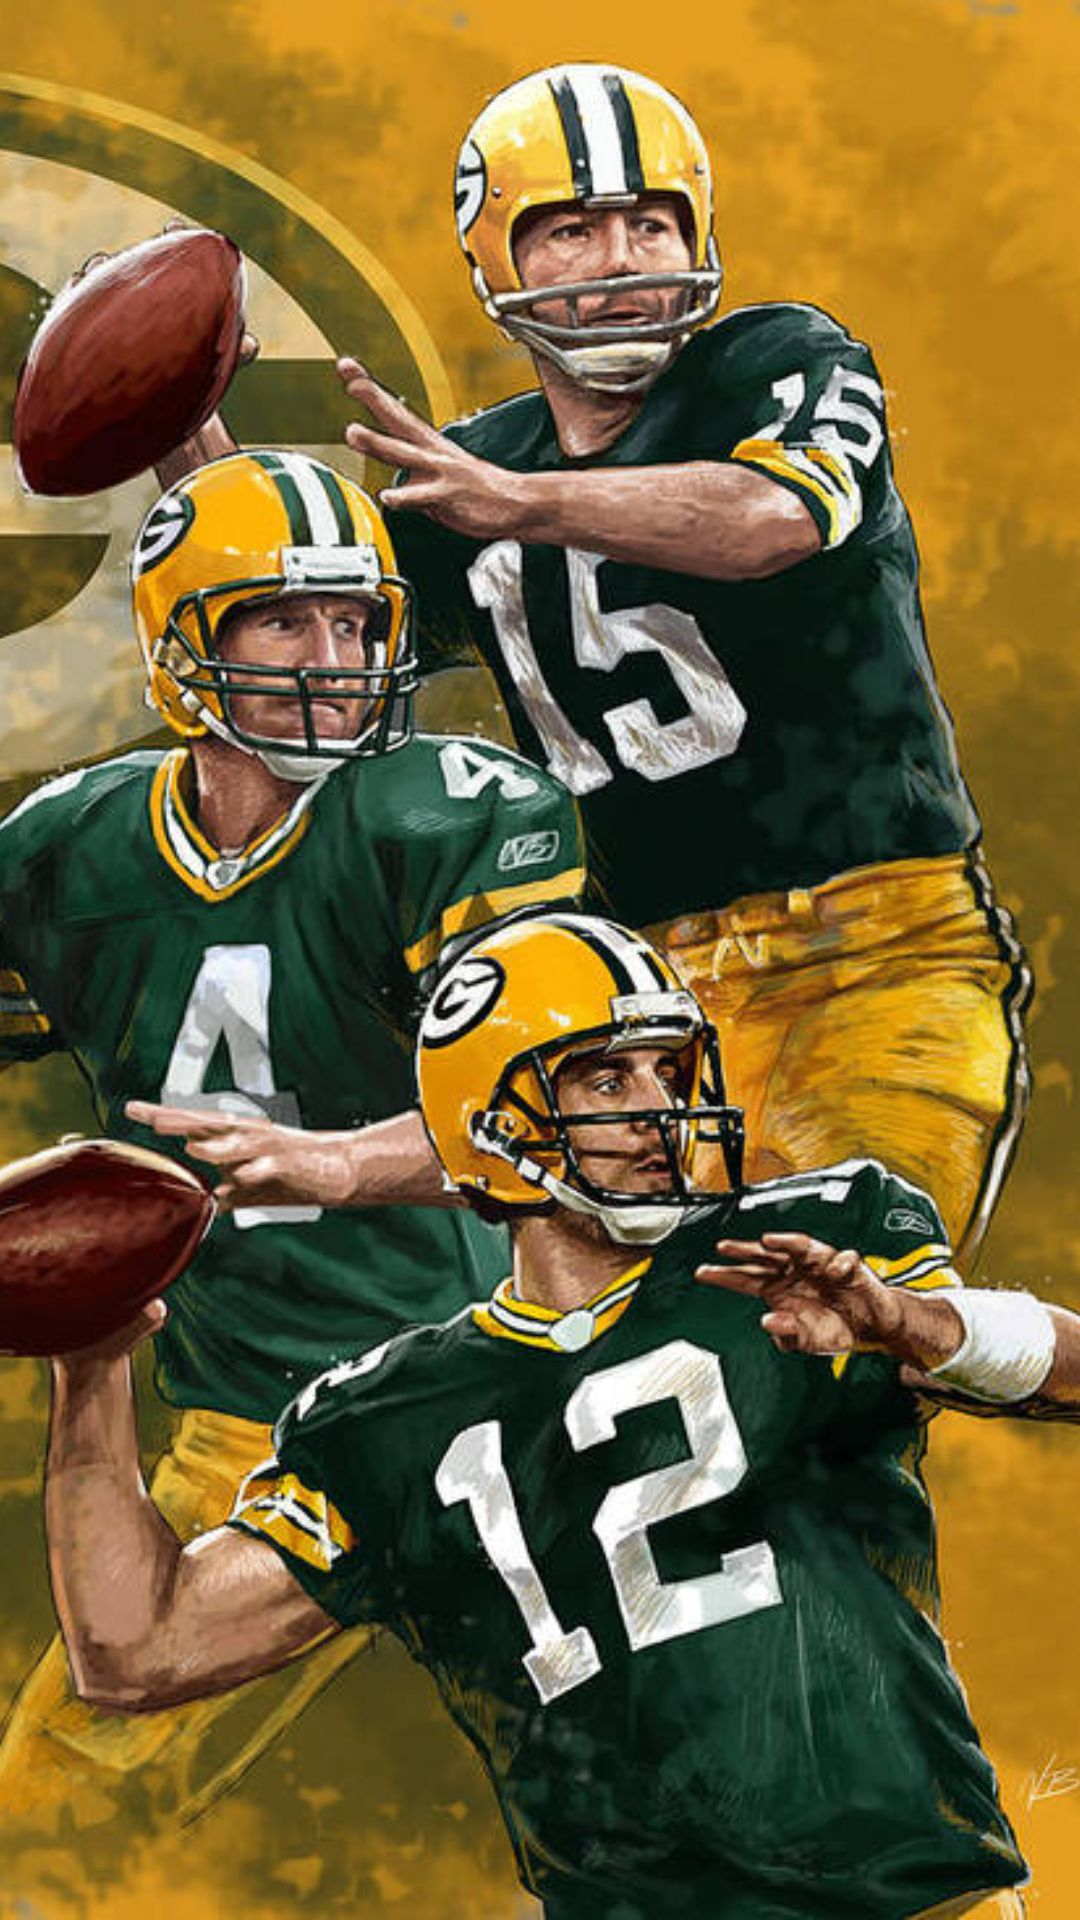 1080x1920 Green Bay Packers Wallpapers Top 25 Best Green Bay Packers Backgrounds Download